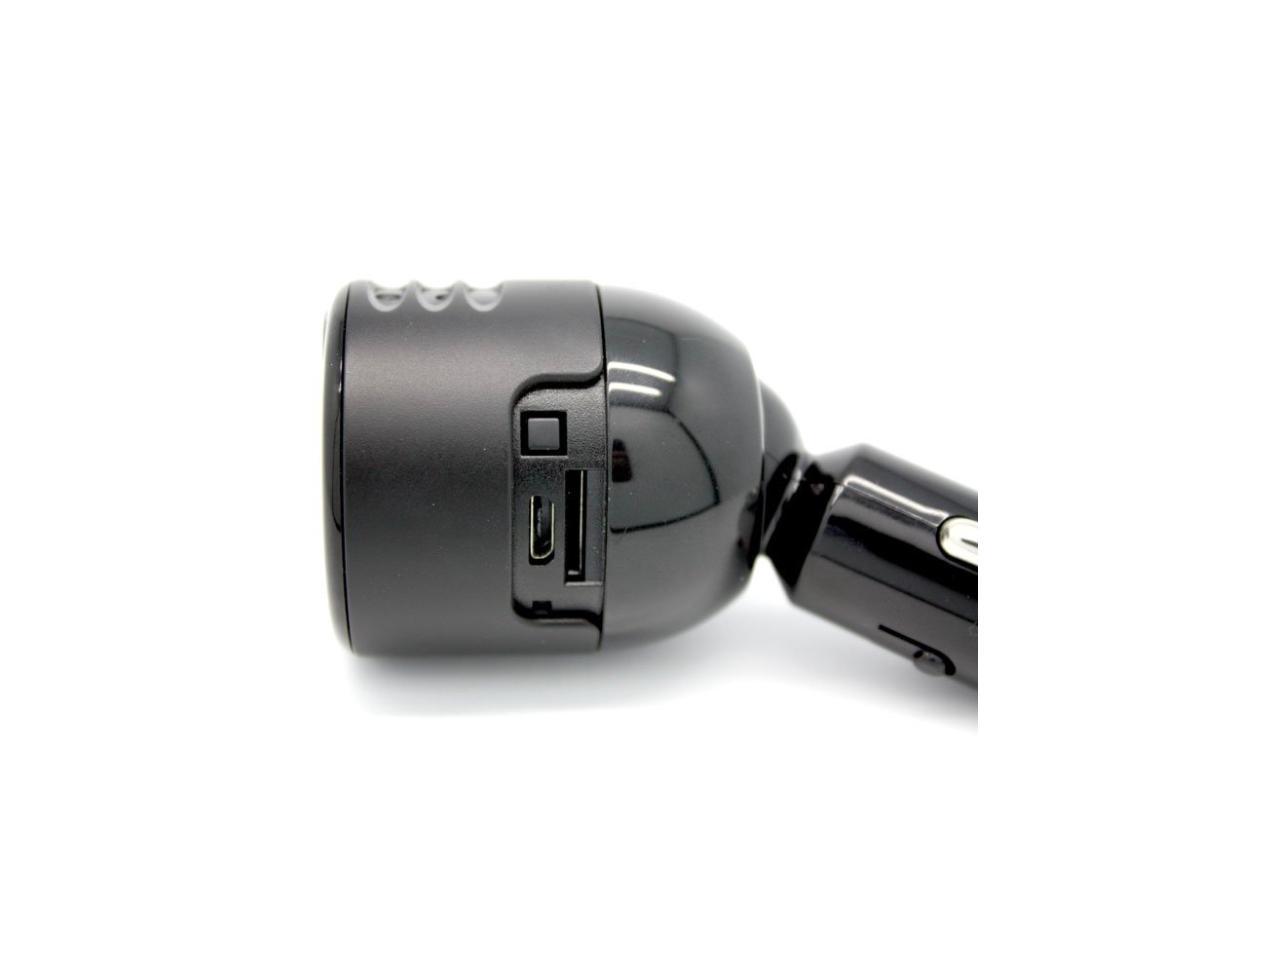 Lawmate Car Charger Hidden Camera With Night Vision Pv Cg With 32gb Micro Sd Card Newegg Com